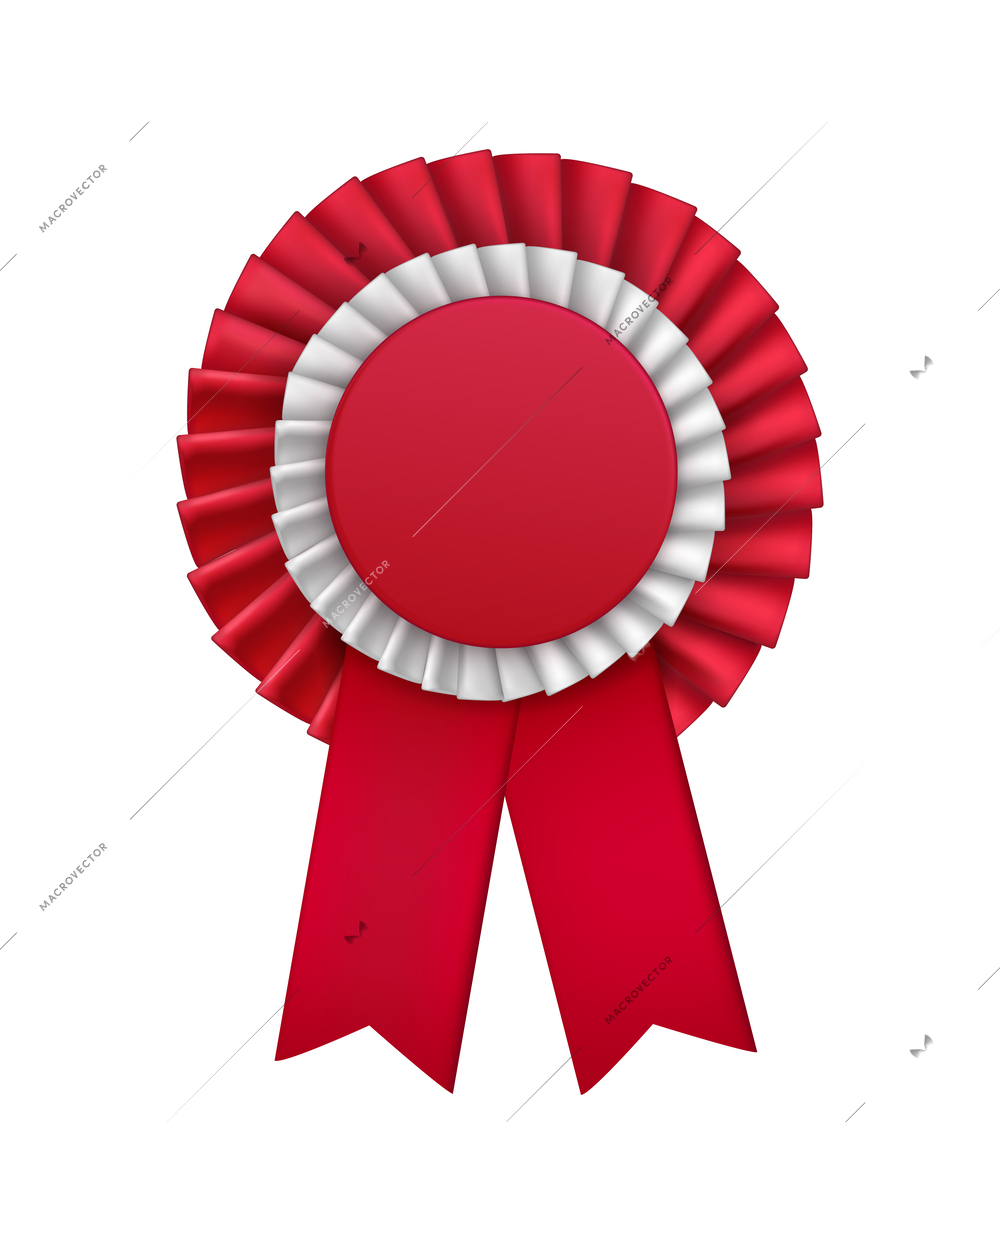 Red badges rosettes award realistic composition with isolated view of ornate paper badge vector illustration